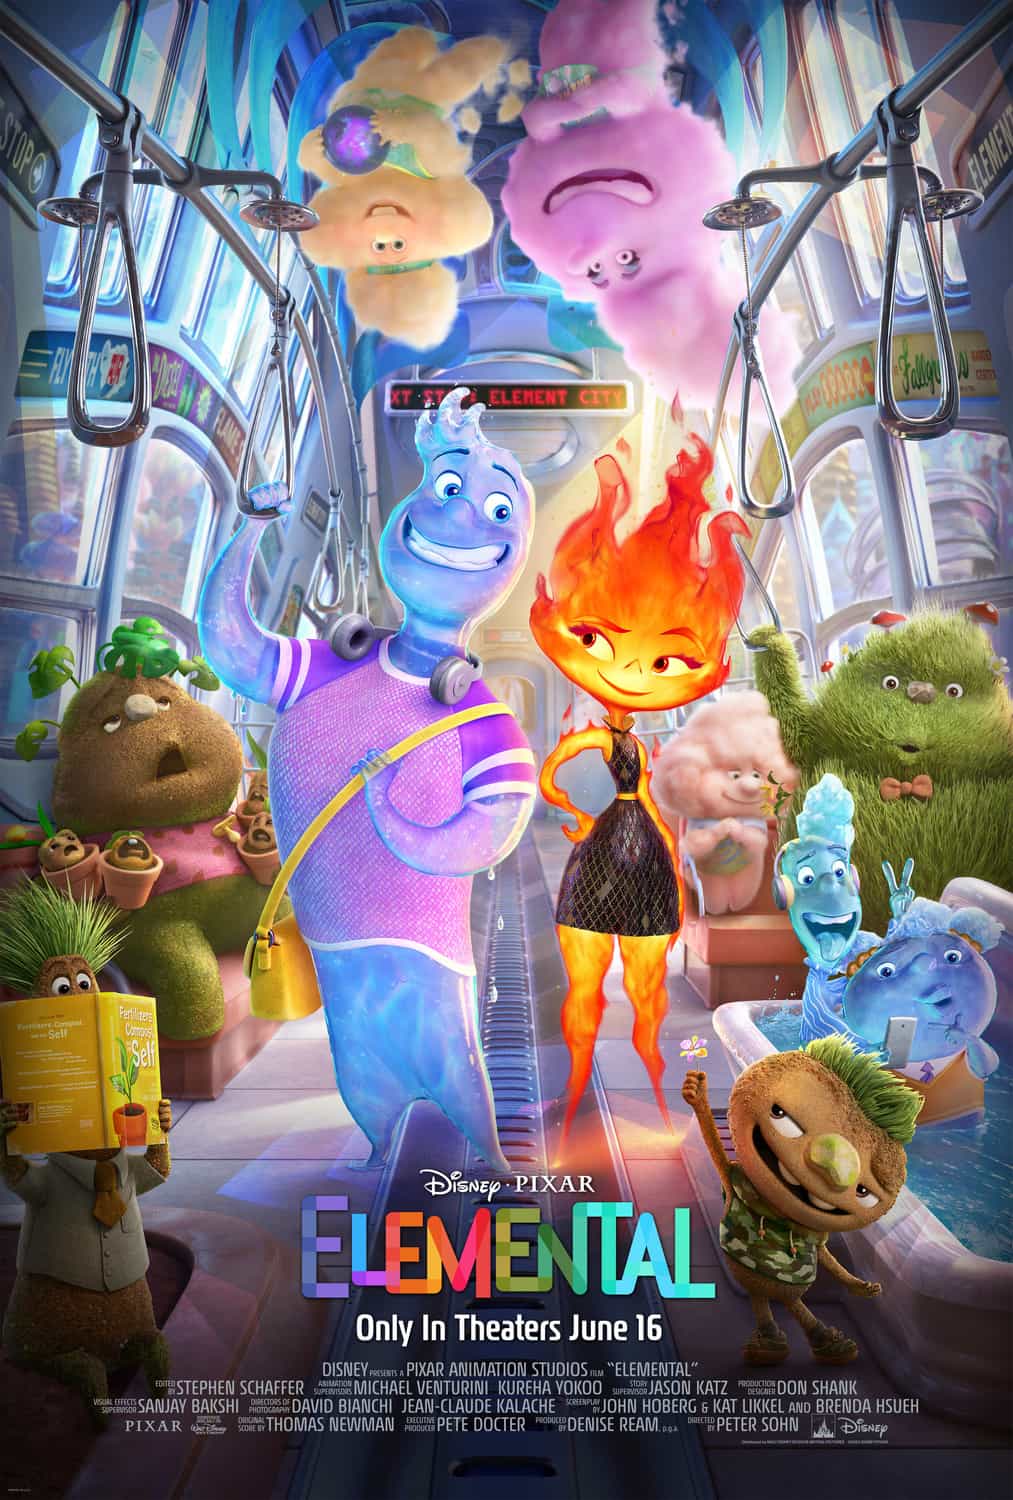 New poster has been released for Elemental which stars Wendi McLendon-Covey and Catherine O	'Hara - movie UK release date 16th June 2023 #elemental